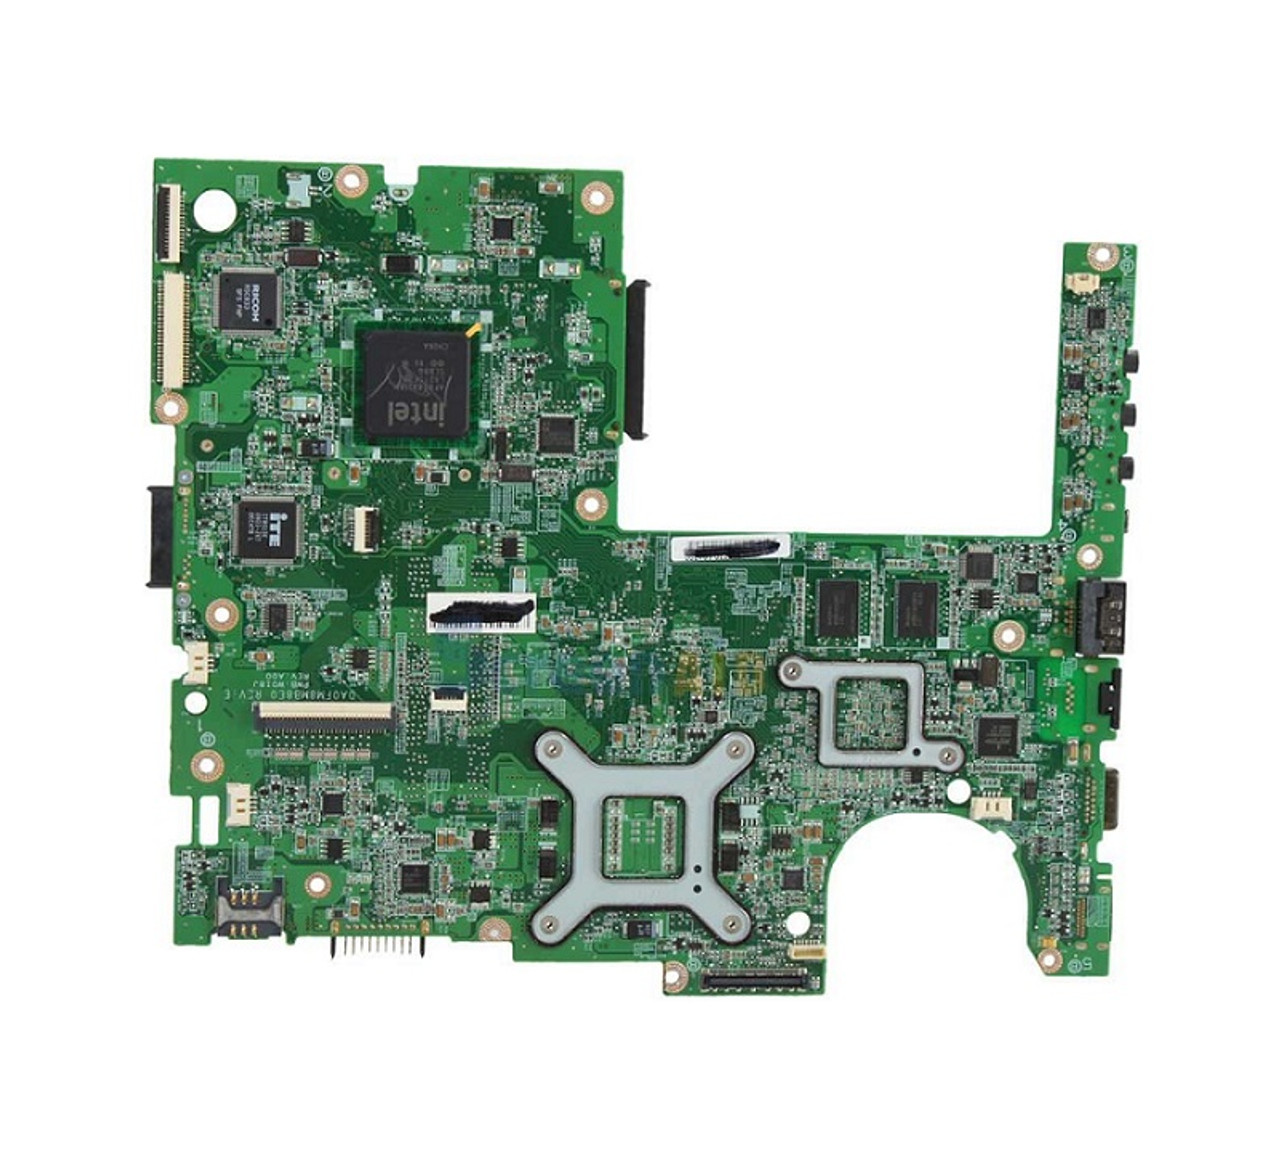 0KW8RD - Dell System Board (Motherboard) Pentium N 2.16GHz (N3540) with CPU for Inspiron 11 (3147) (Refurbished)